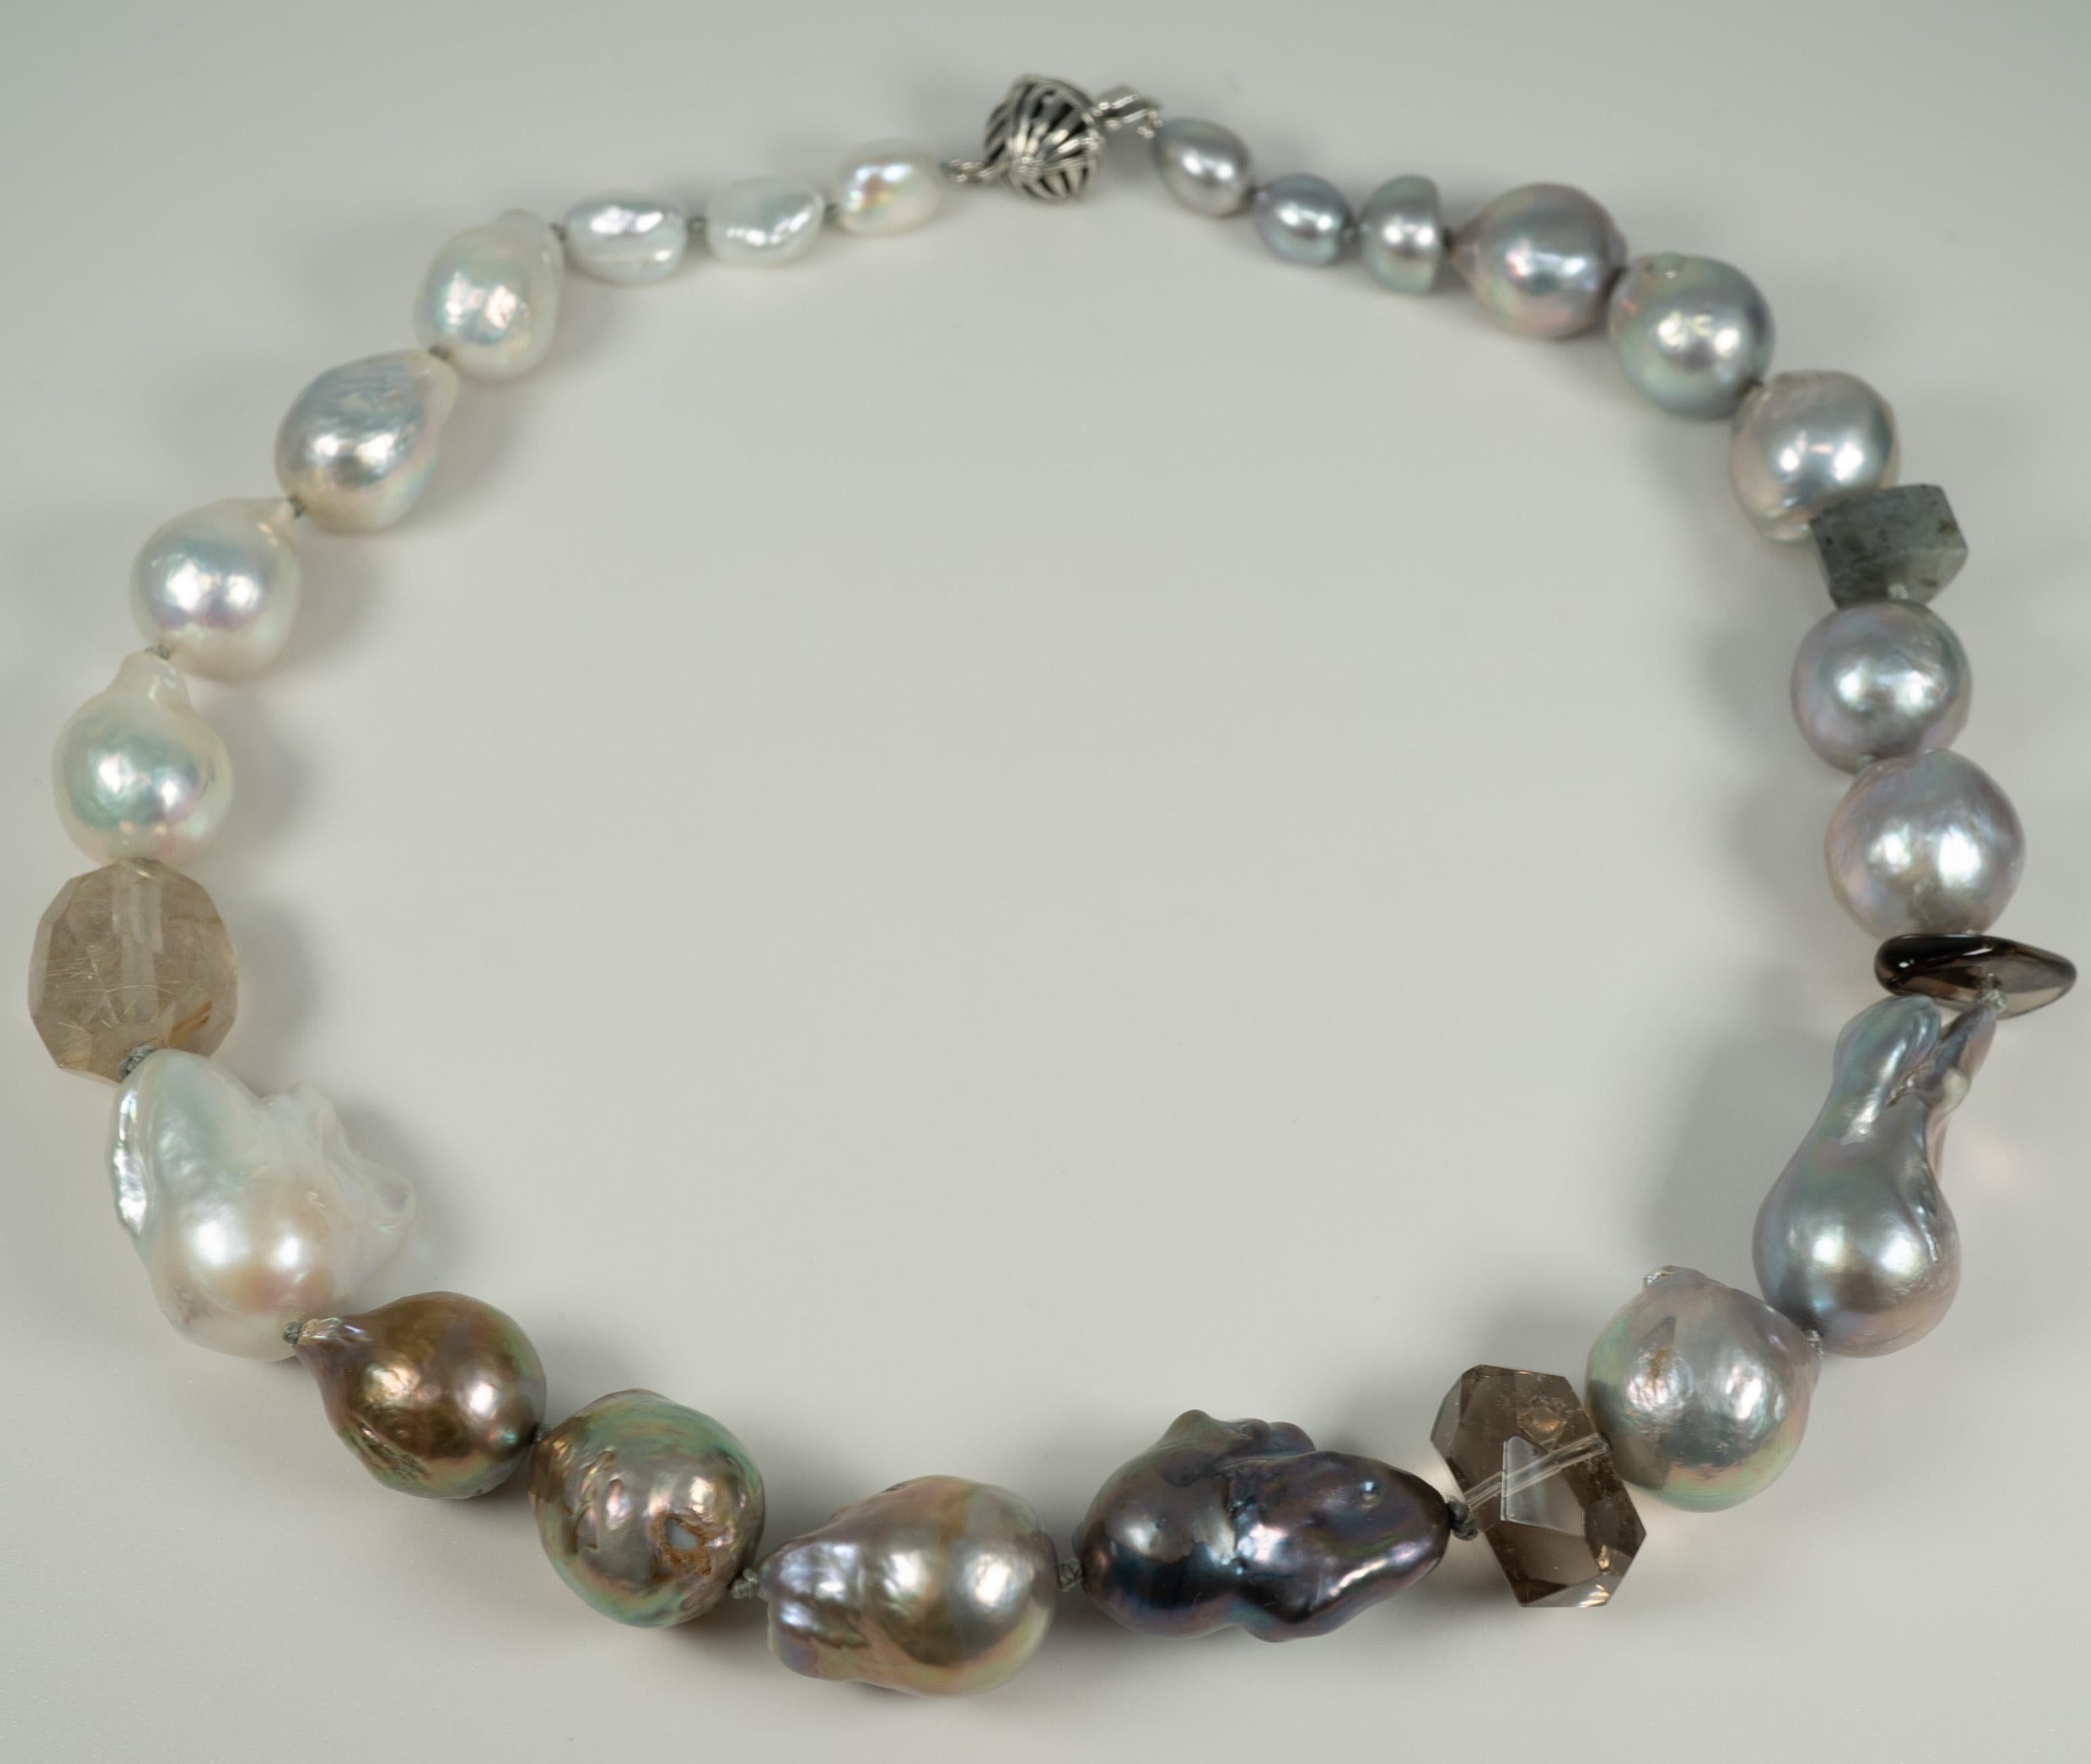 More fun pearl shapes from Mother Nature!  Accented with faceted quartz stones!